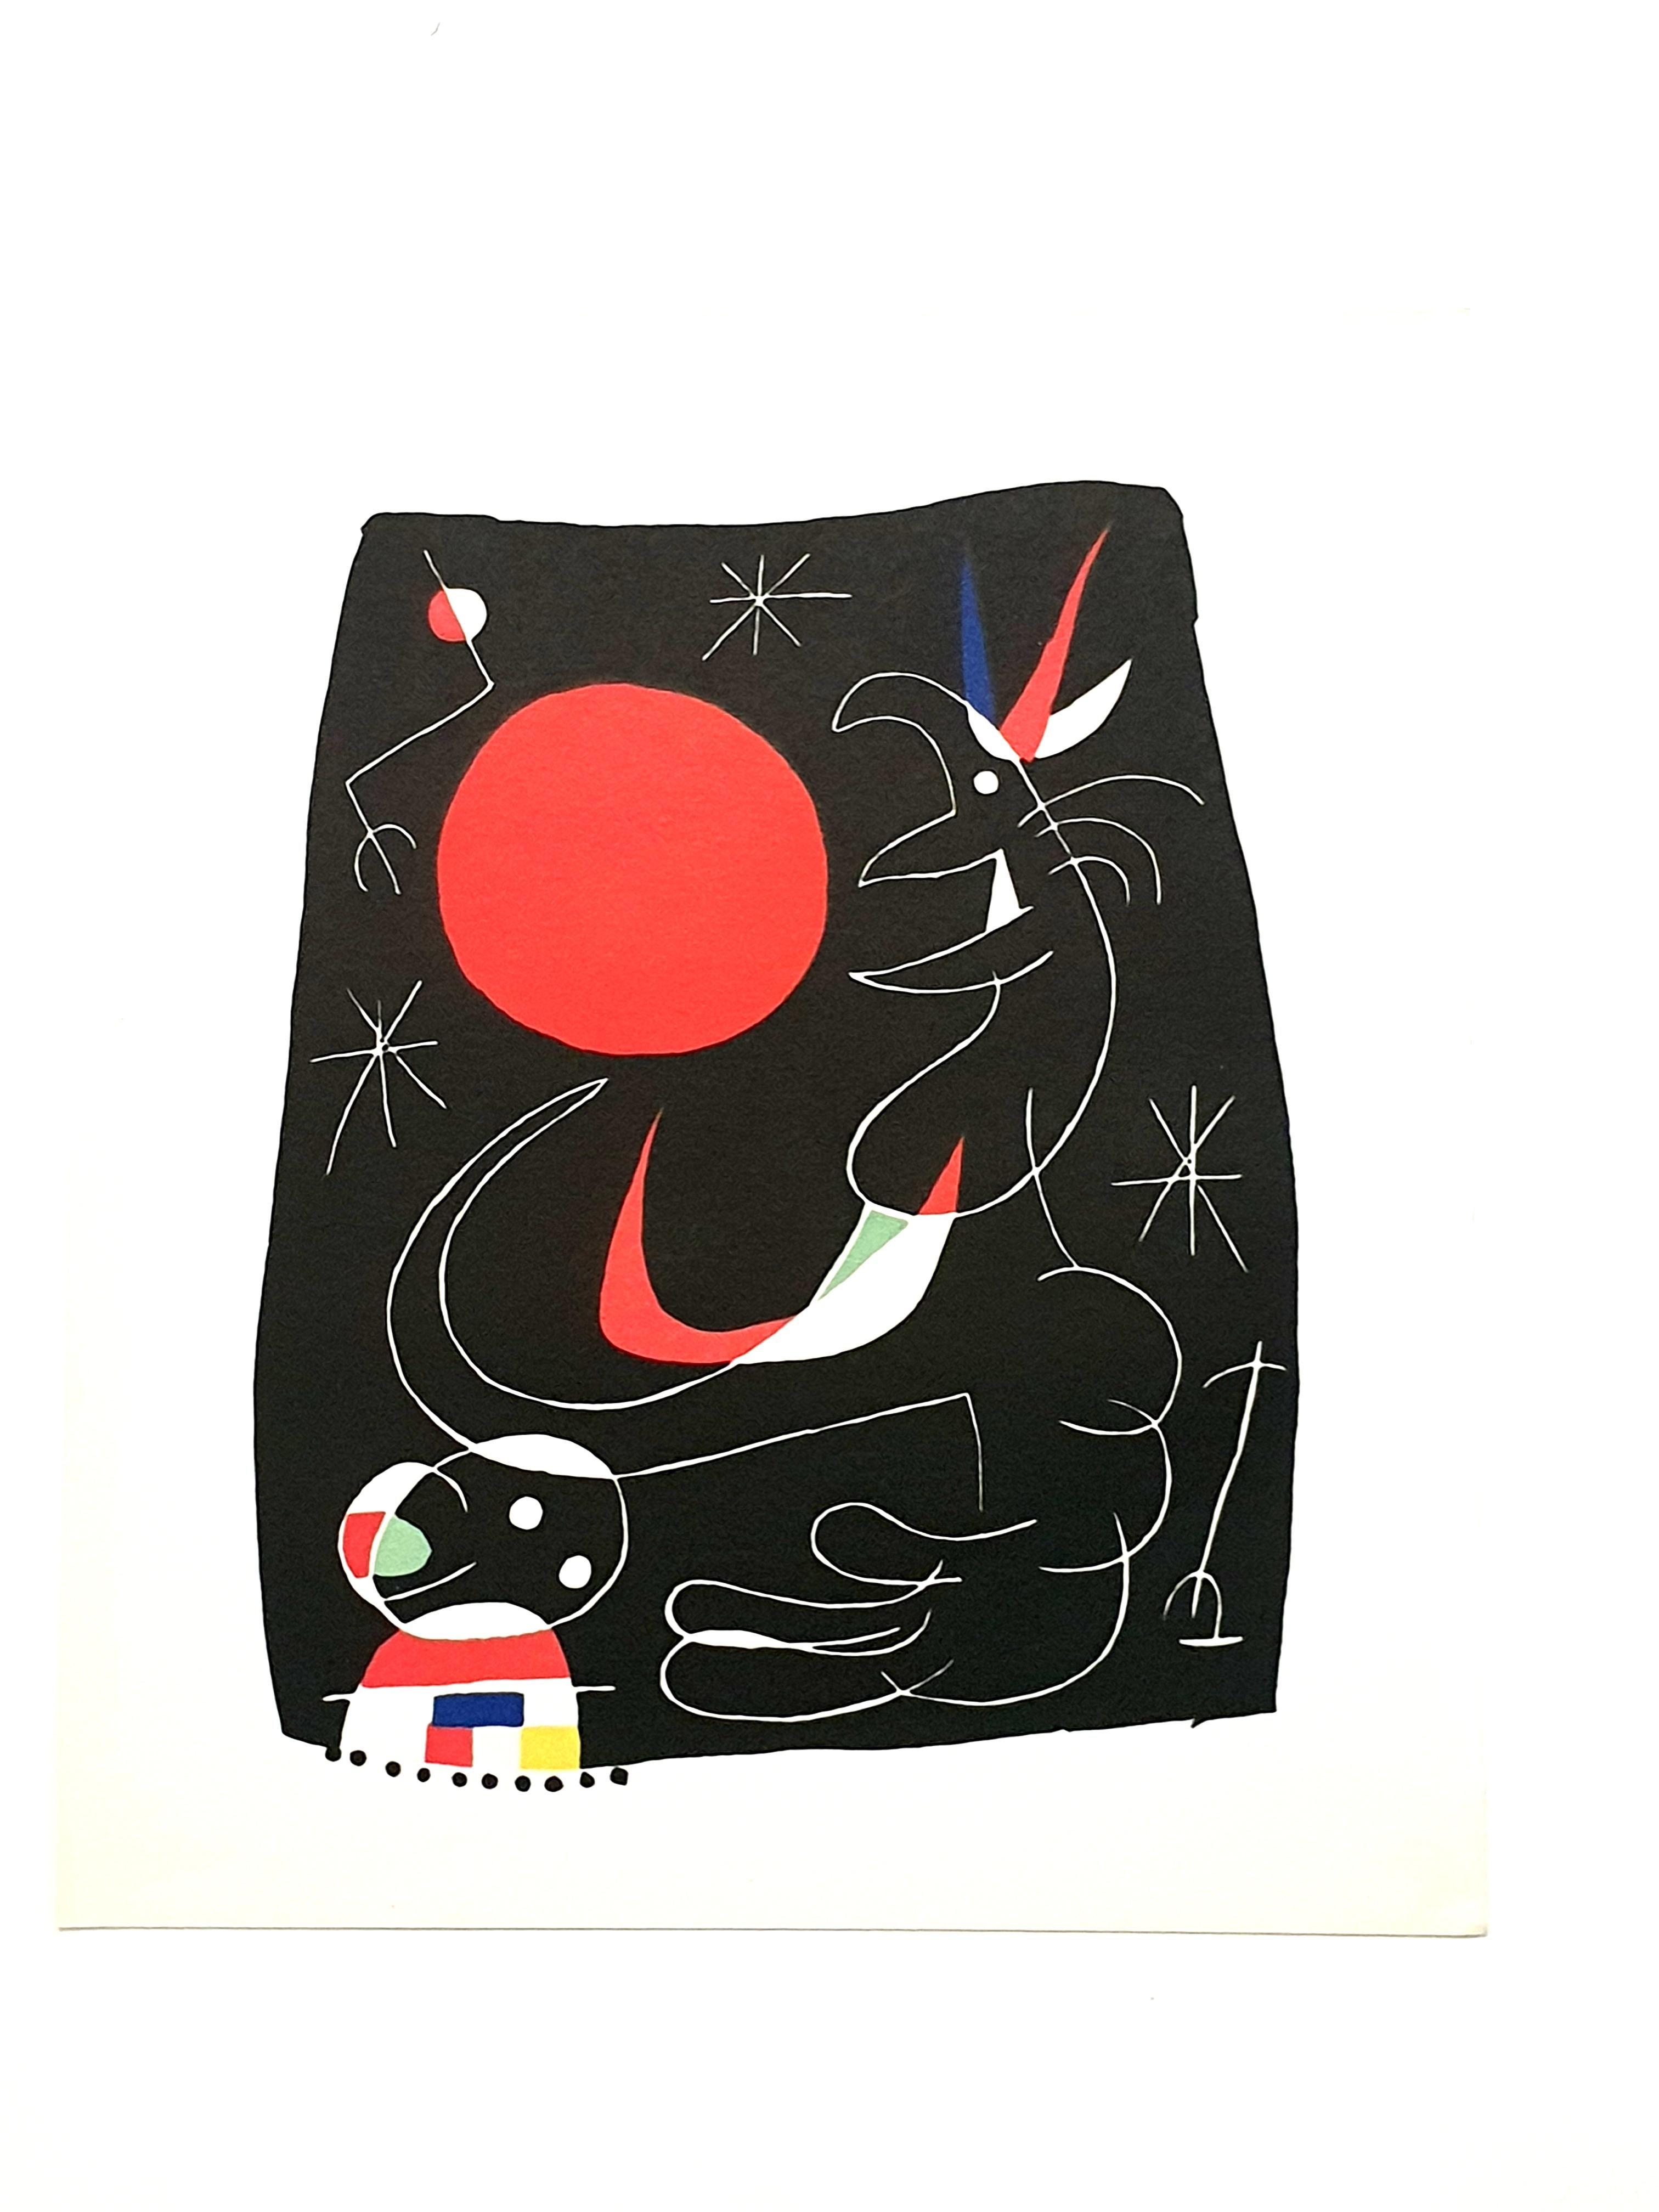 Joan Miro - Night Sky - Original Lithograph
Artist: Joan Miro
Editor: Maeght
Year: 1956
Dimensions: 23 x 20 cm
Reference: Mourlot 235
Unsigned and unumbered as issued.